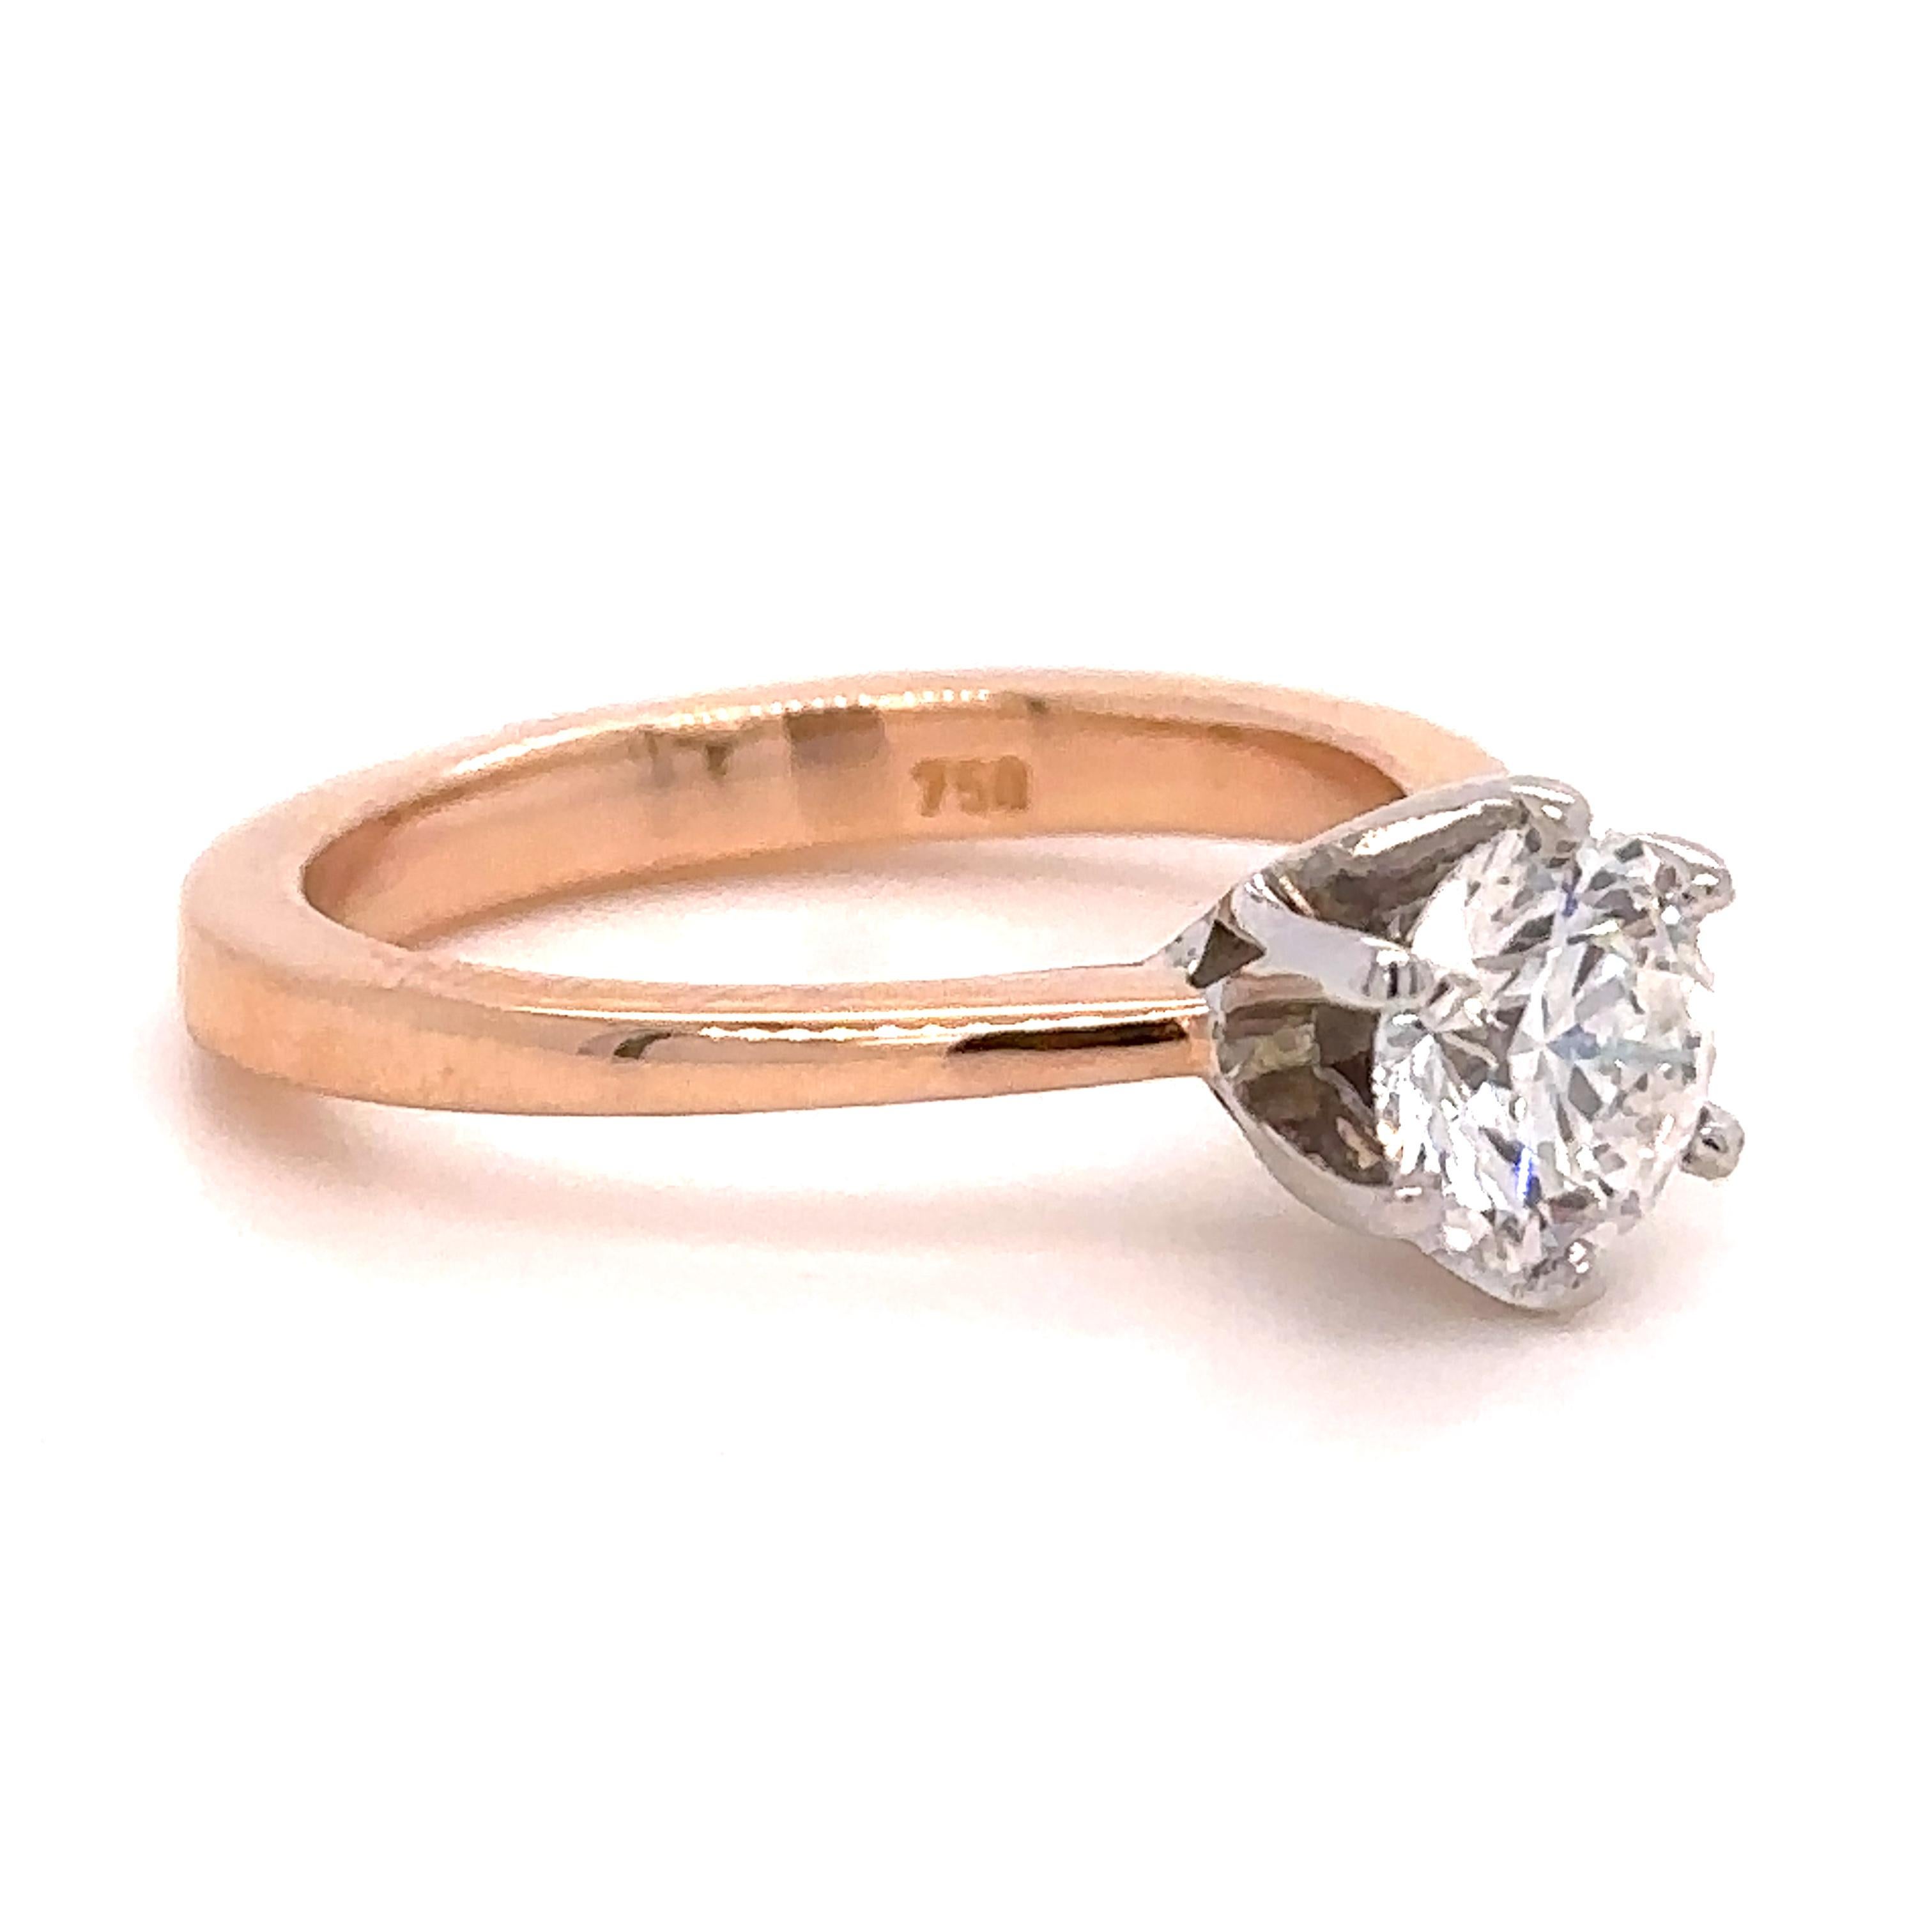 Unique features:

A GIA Diamond engagement ring made of 18 ct Rose Gold, set with a Single Round, brilliant cut Diamond weighing 1.10 ct, G Colour, SI1 Clarity. 

Metal: 18ct Rose Gold
Carat: 1.10ct
Colour: G
Clarity: SI1
Cut: Round Brilliant